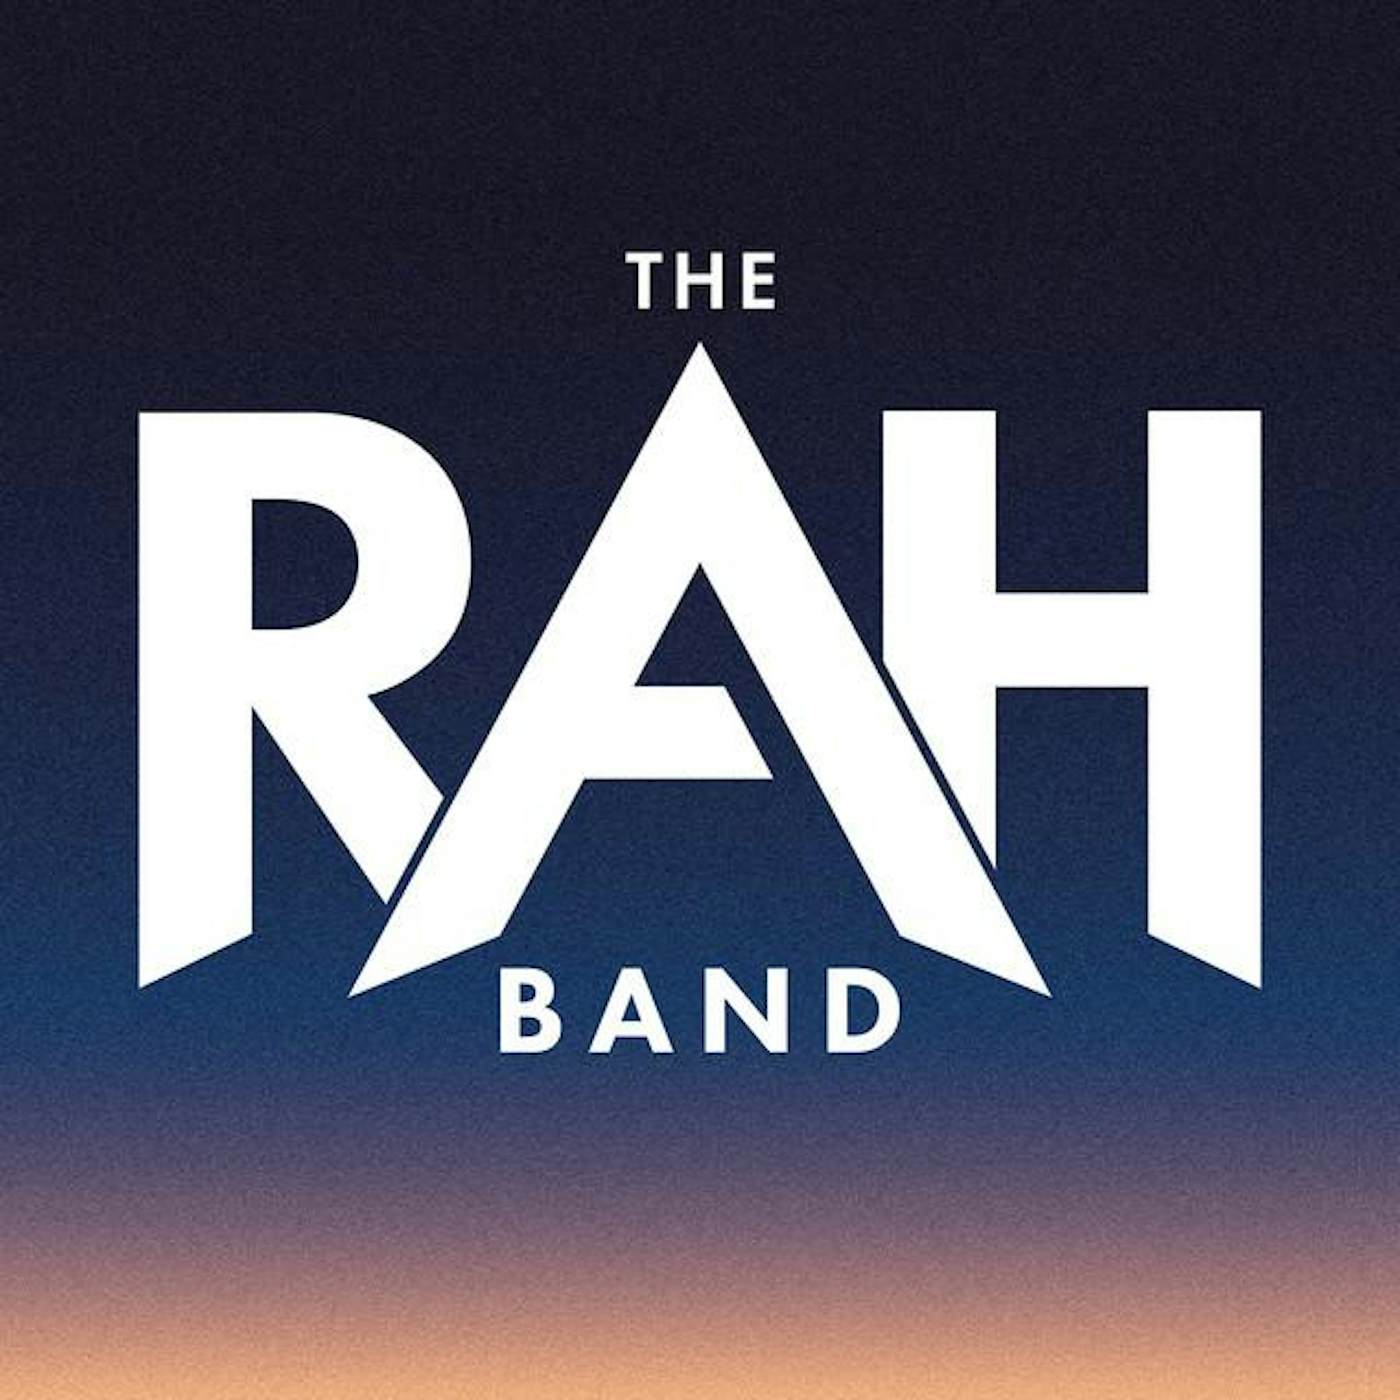 Messages from the stars the rah. The Rah Band. The Rah Band участники. The Rah Band солистка. The Rah Band Falcon.